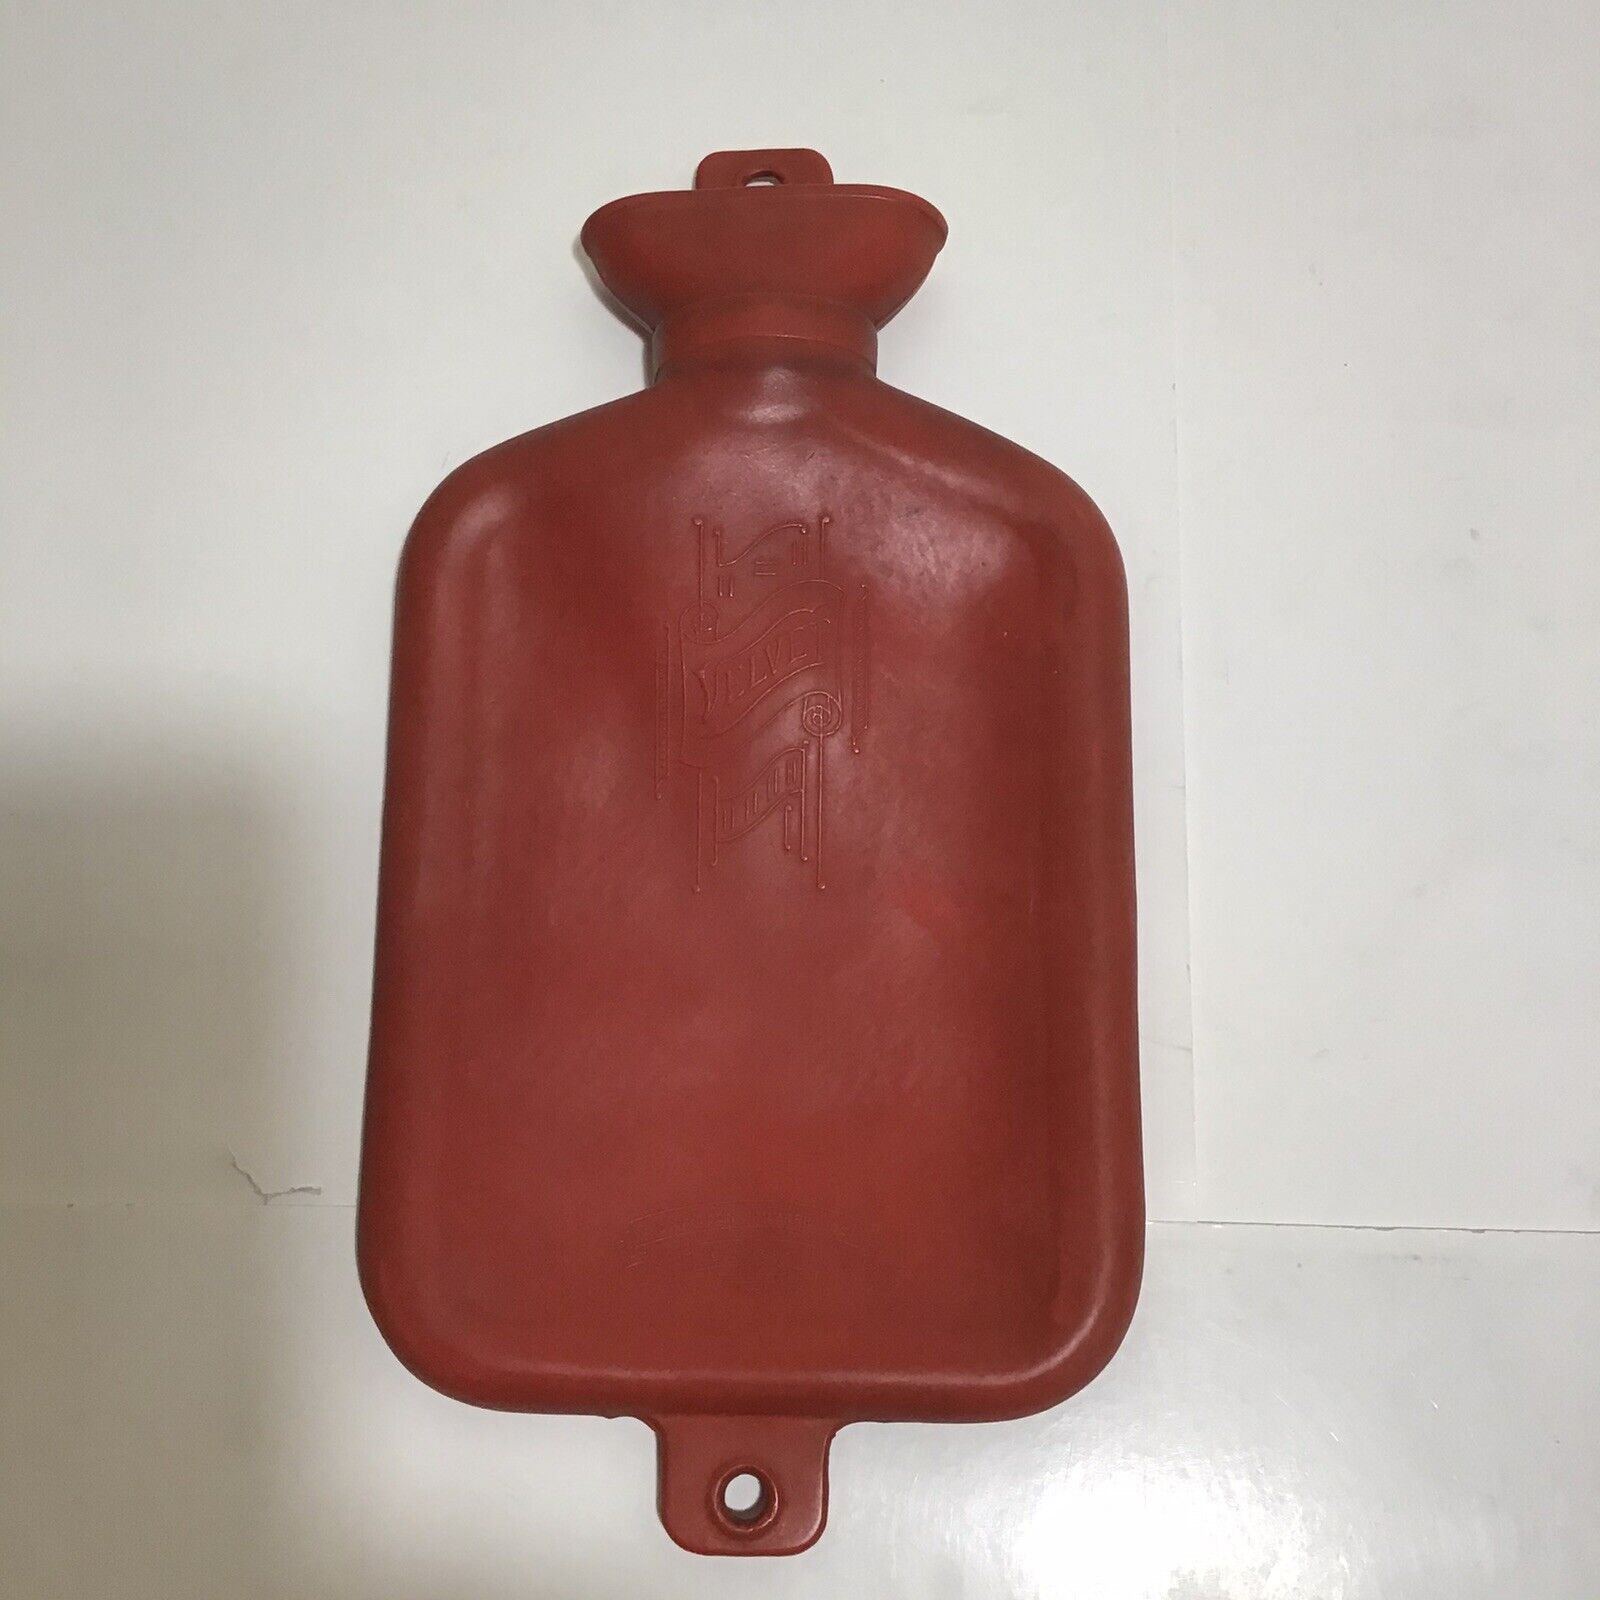 VTG 1950’s Red Rubber Hot Water Bottle With Screw On Lid